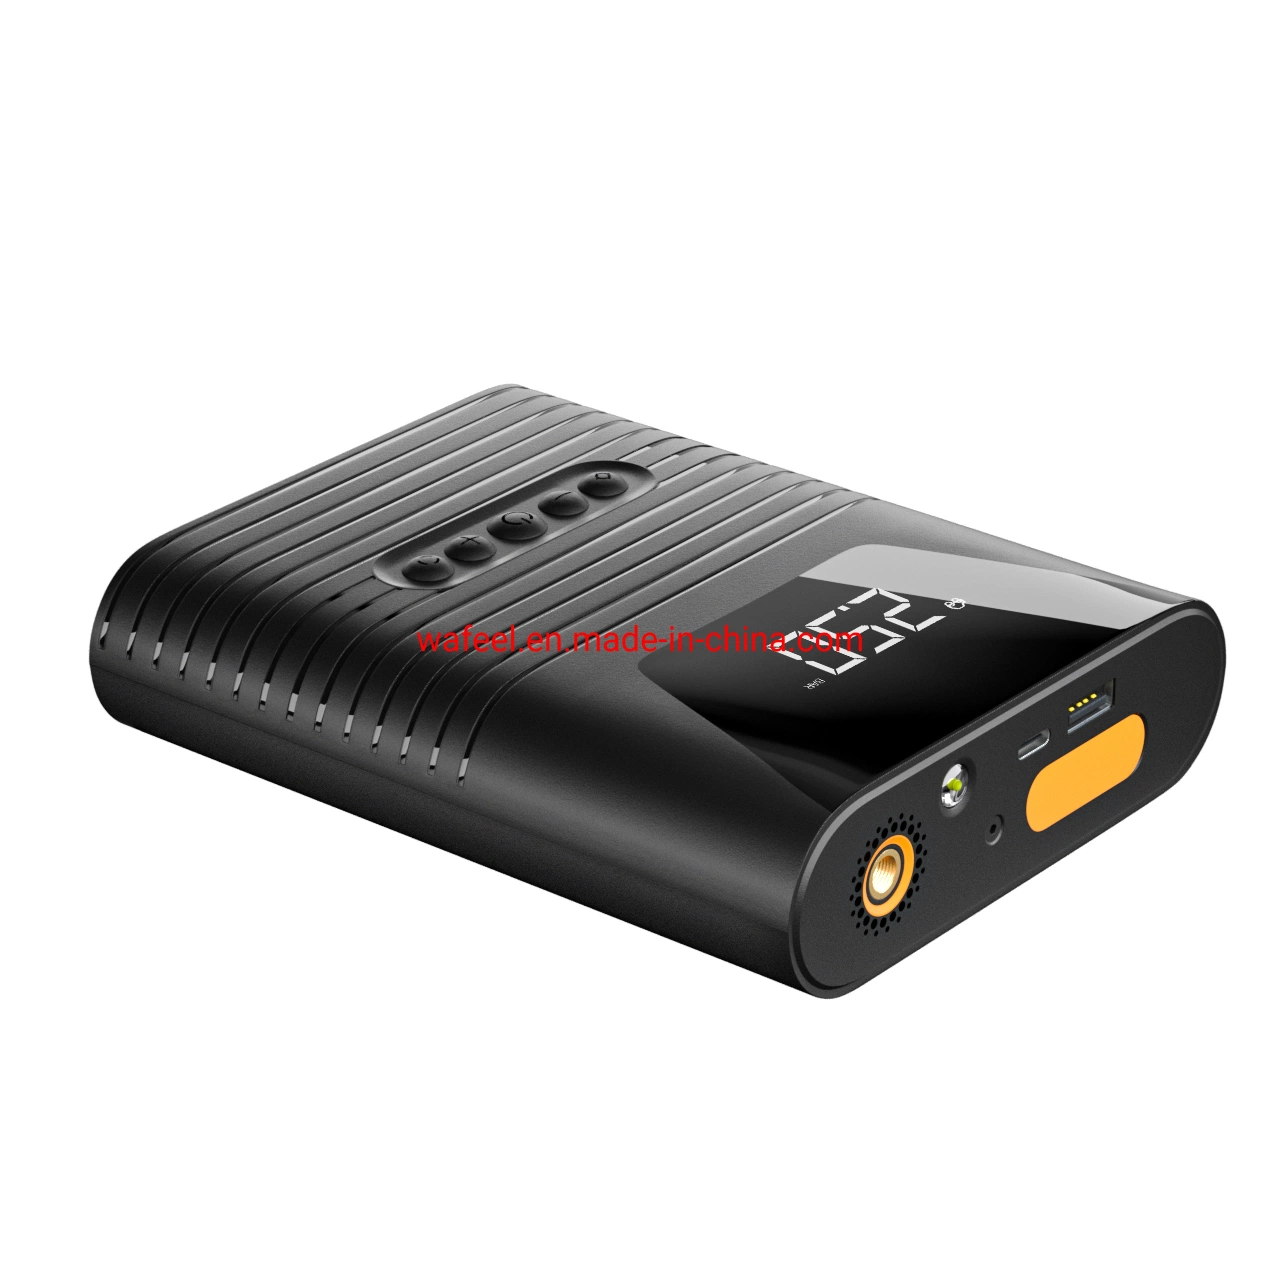 Auto Starting Power Supply Bank 8800mAh Battery Charger Portable Car Battery Jump Starter